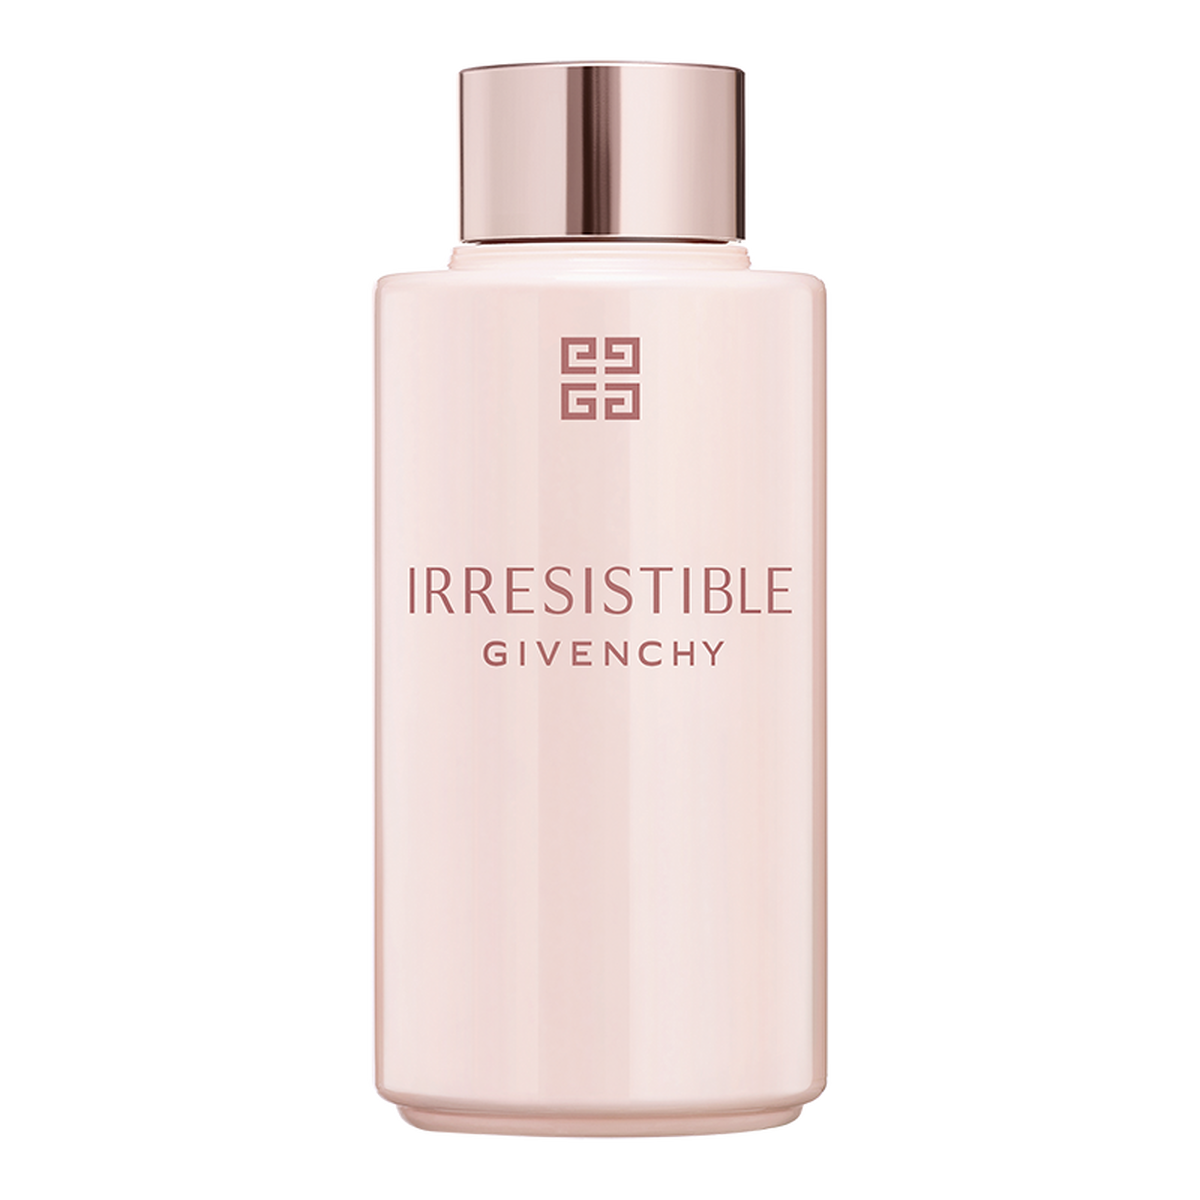 Total 38+ imagen irresistible givenchy body lotion